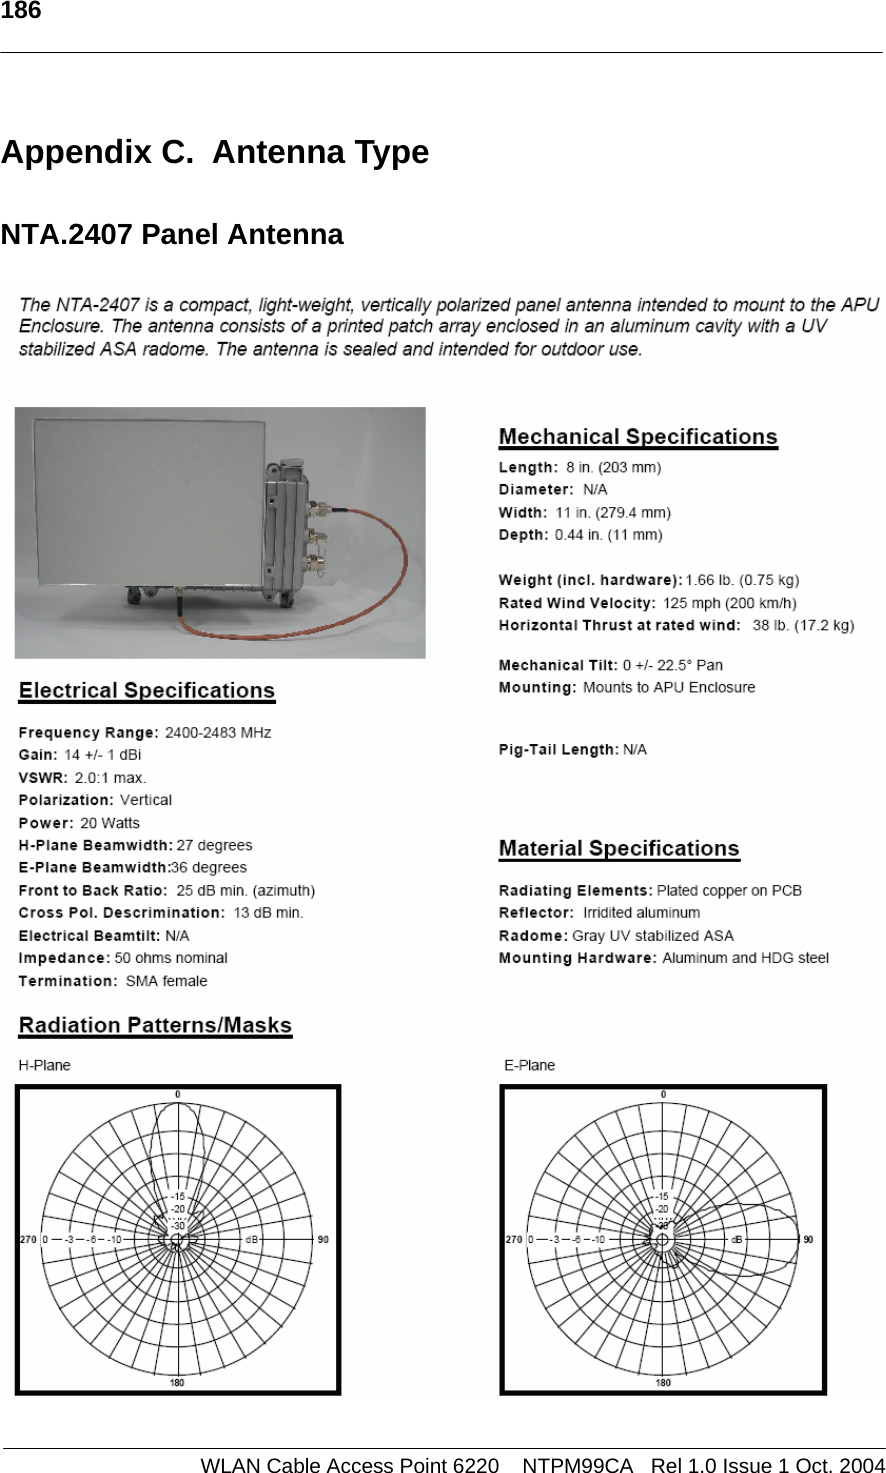   186   Appendix C.  Antenna Type   NTA.2407 Panel Antenna      WLAN Cable Access Point 6220    NTPM99CA   Rel 1.0 Issue 1 Oct. 2004